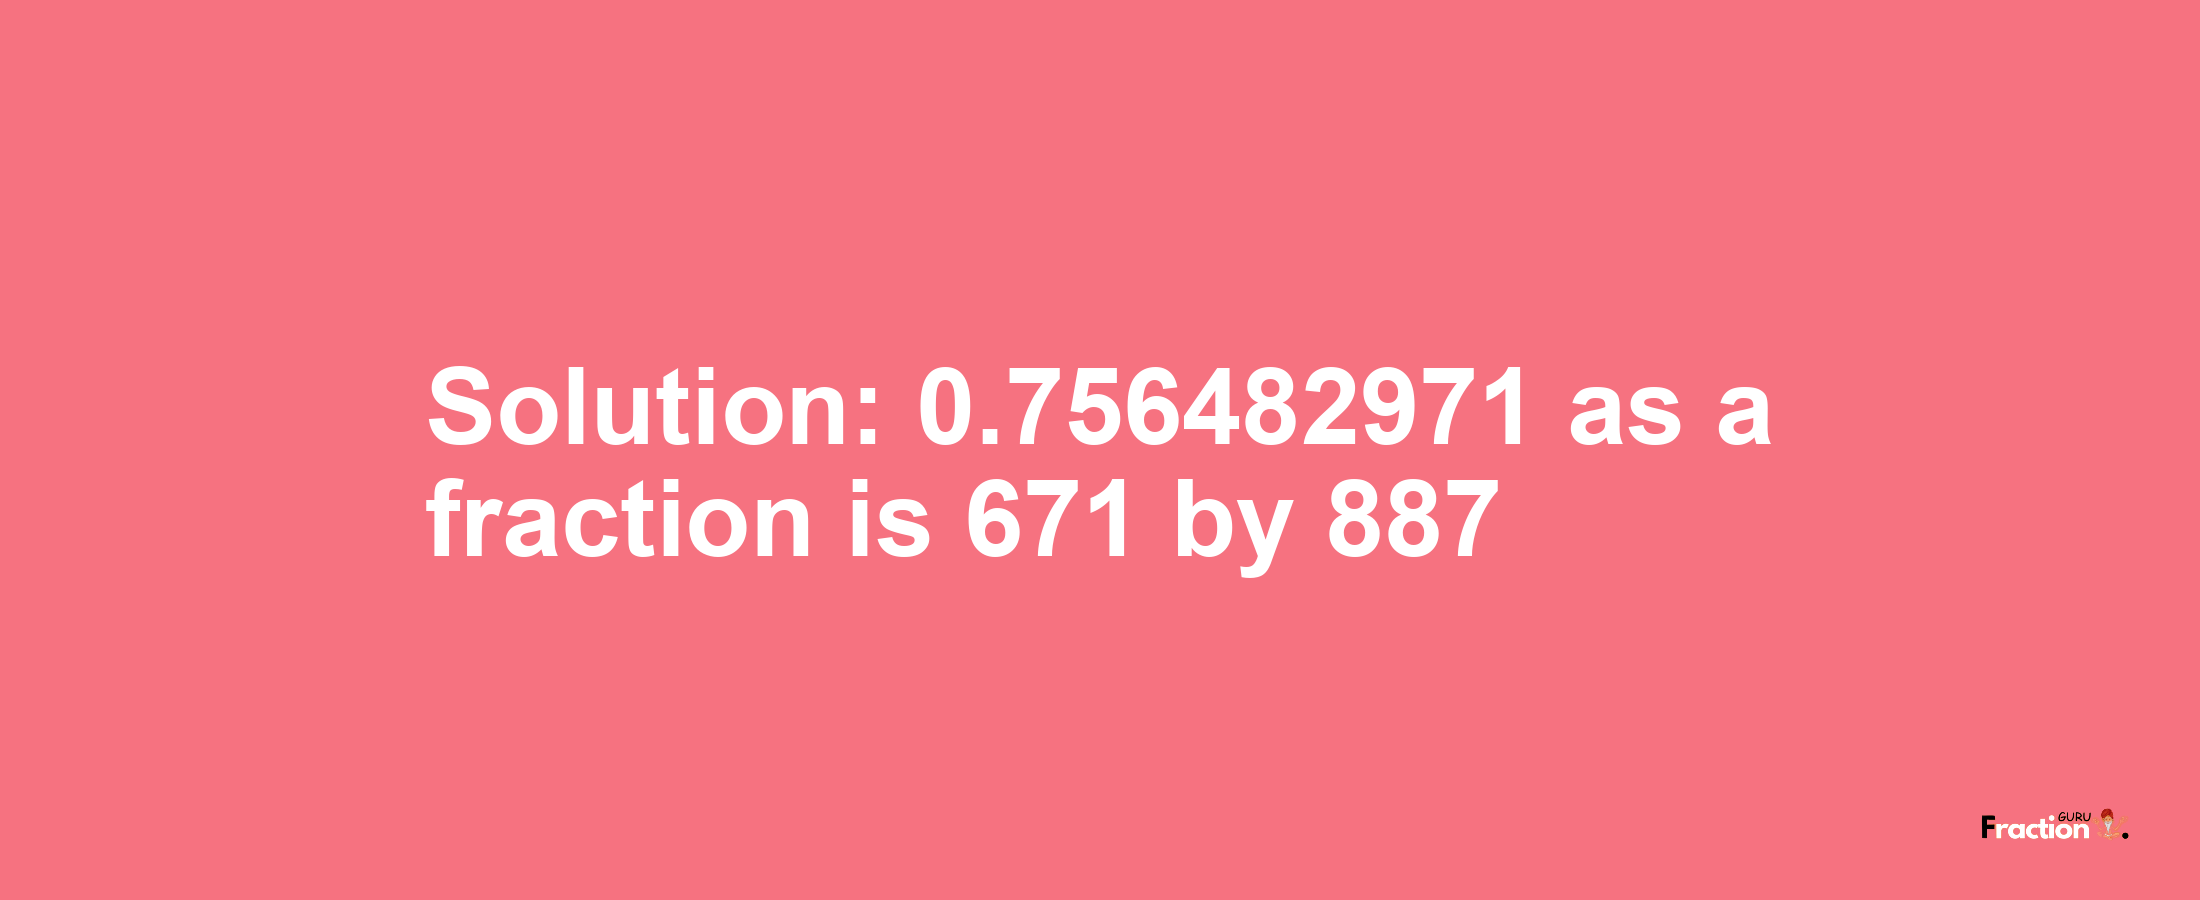 Solution:0.756482971 as a fraction is 671/887